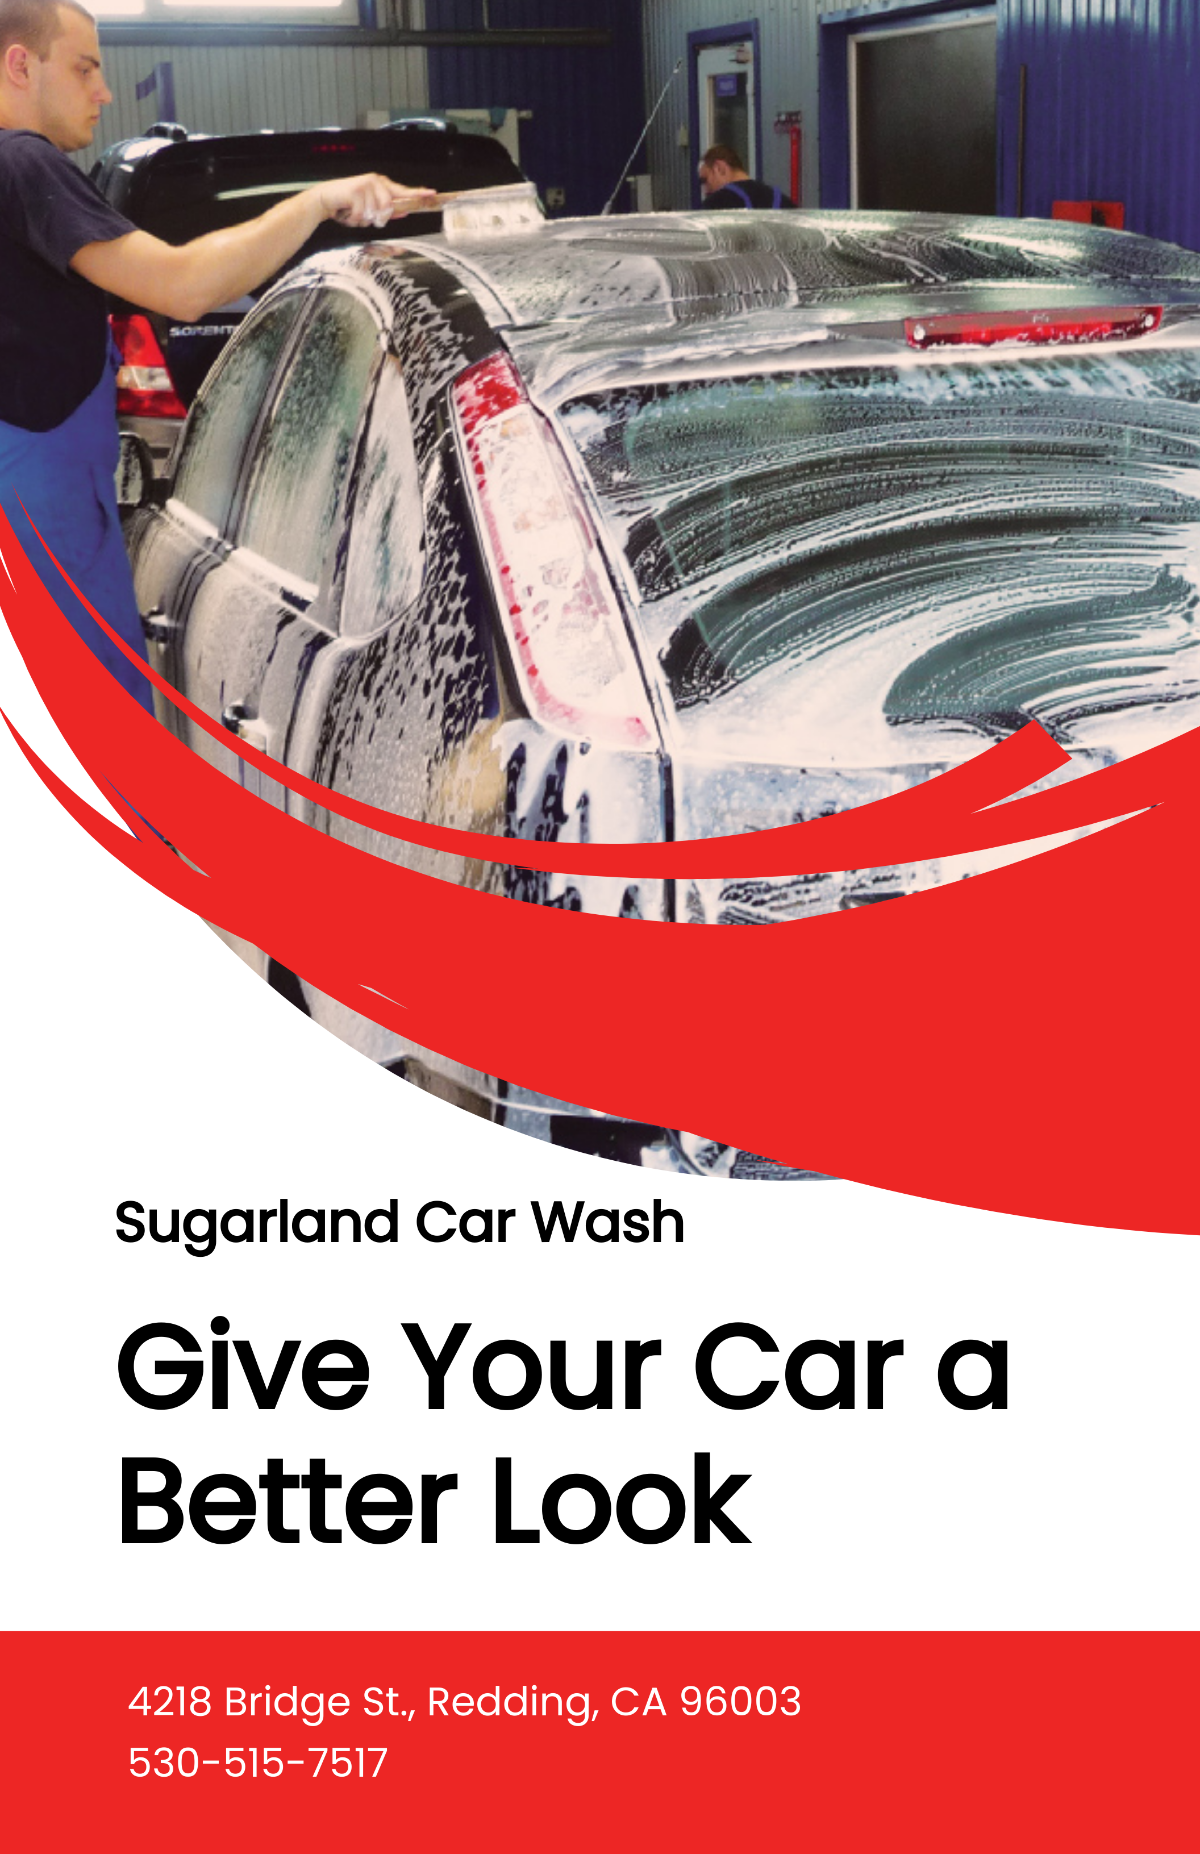 Car Wash A3 Poster Template